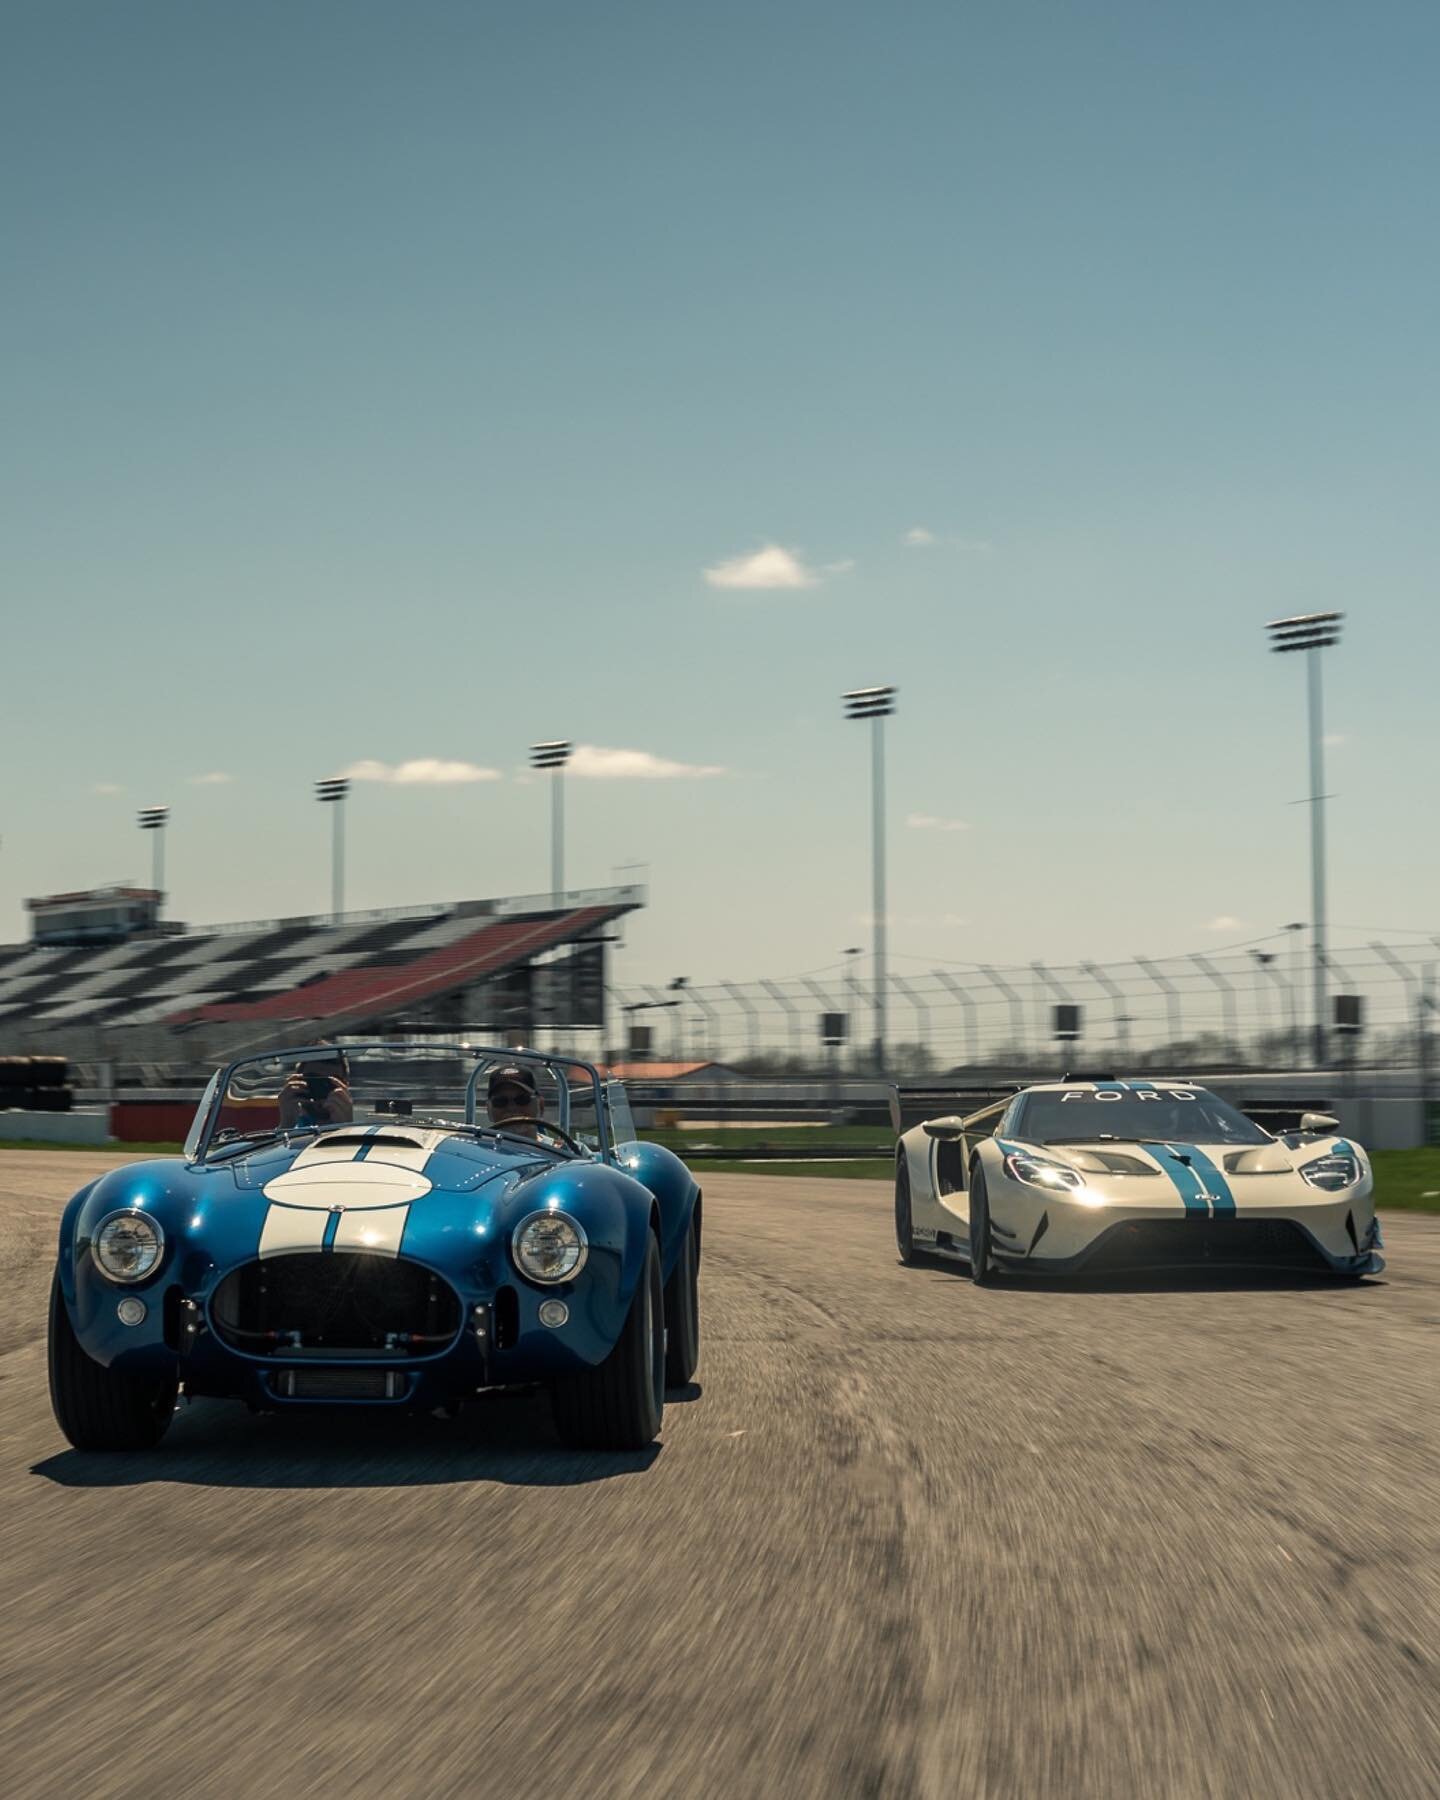 A true classic vs a modern track monster. You don&rsquo;t want to miss this set. Start swiping 👈!

&mdash;&mdash;&mdash;&mdash;&mdash;&mdash;&mdash;&mdash;
#shelbycobra #fordgtsupercar #fordgt #fordgtclub #fordperformance #fordracing #ford #wwtracew